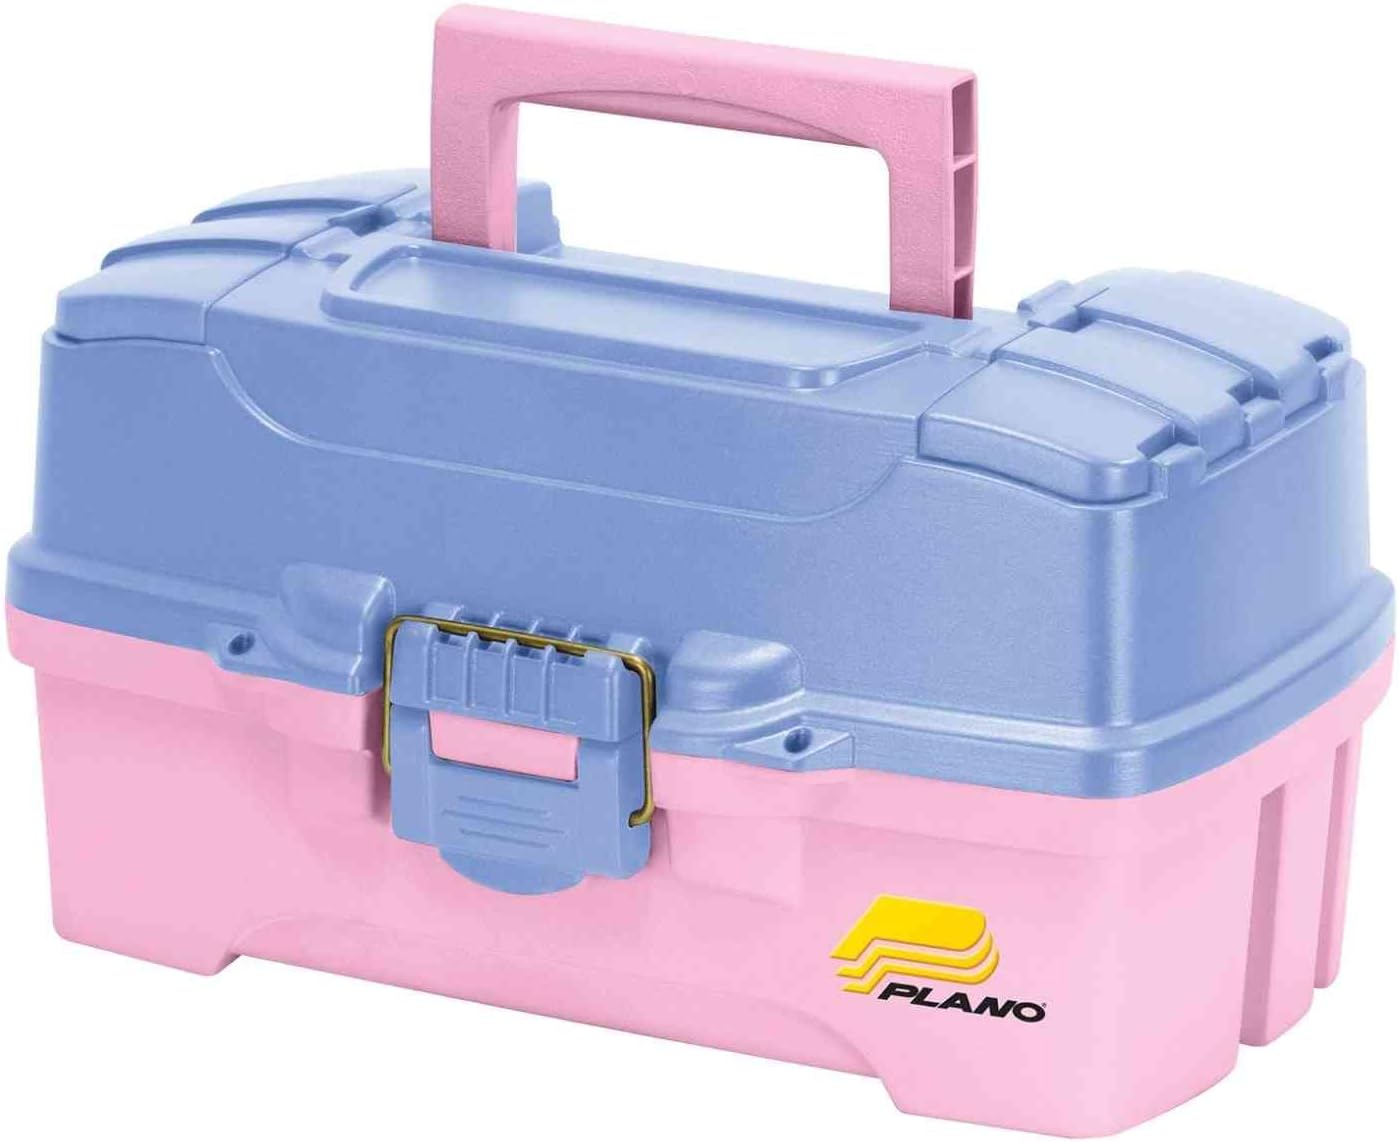 Plano 2-Tray Tackle Box with Dual Top Access, Periwinkle/Pink